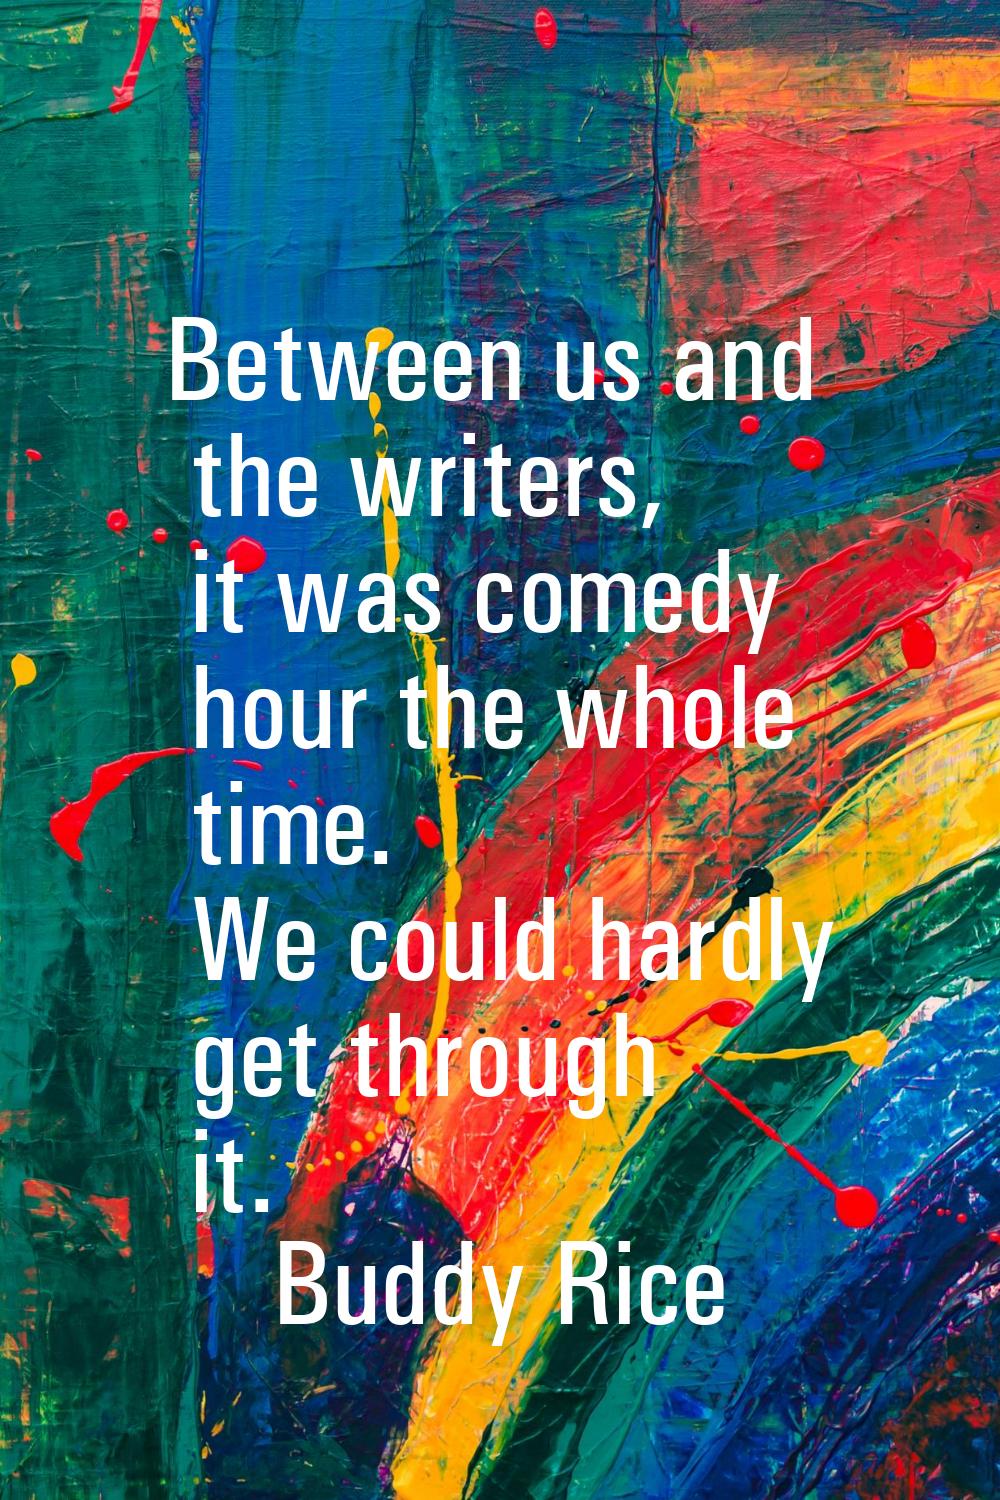 Between us and the writers, it was comedy hour the whole time. We could hardly get through it.